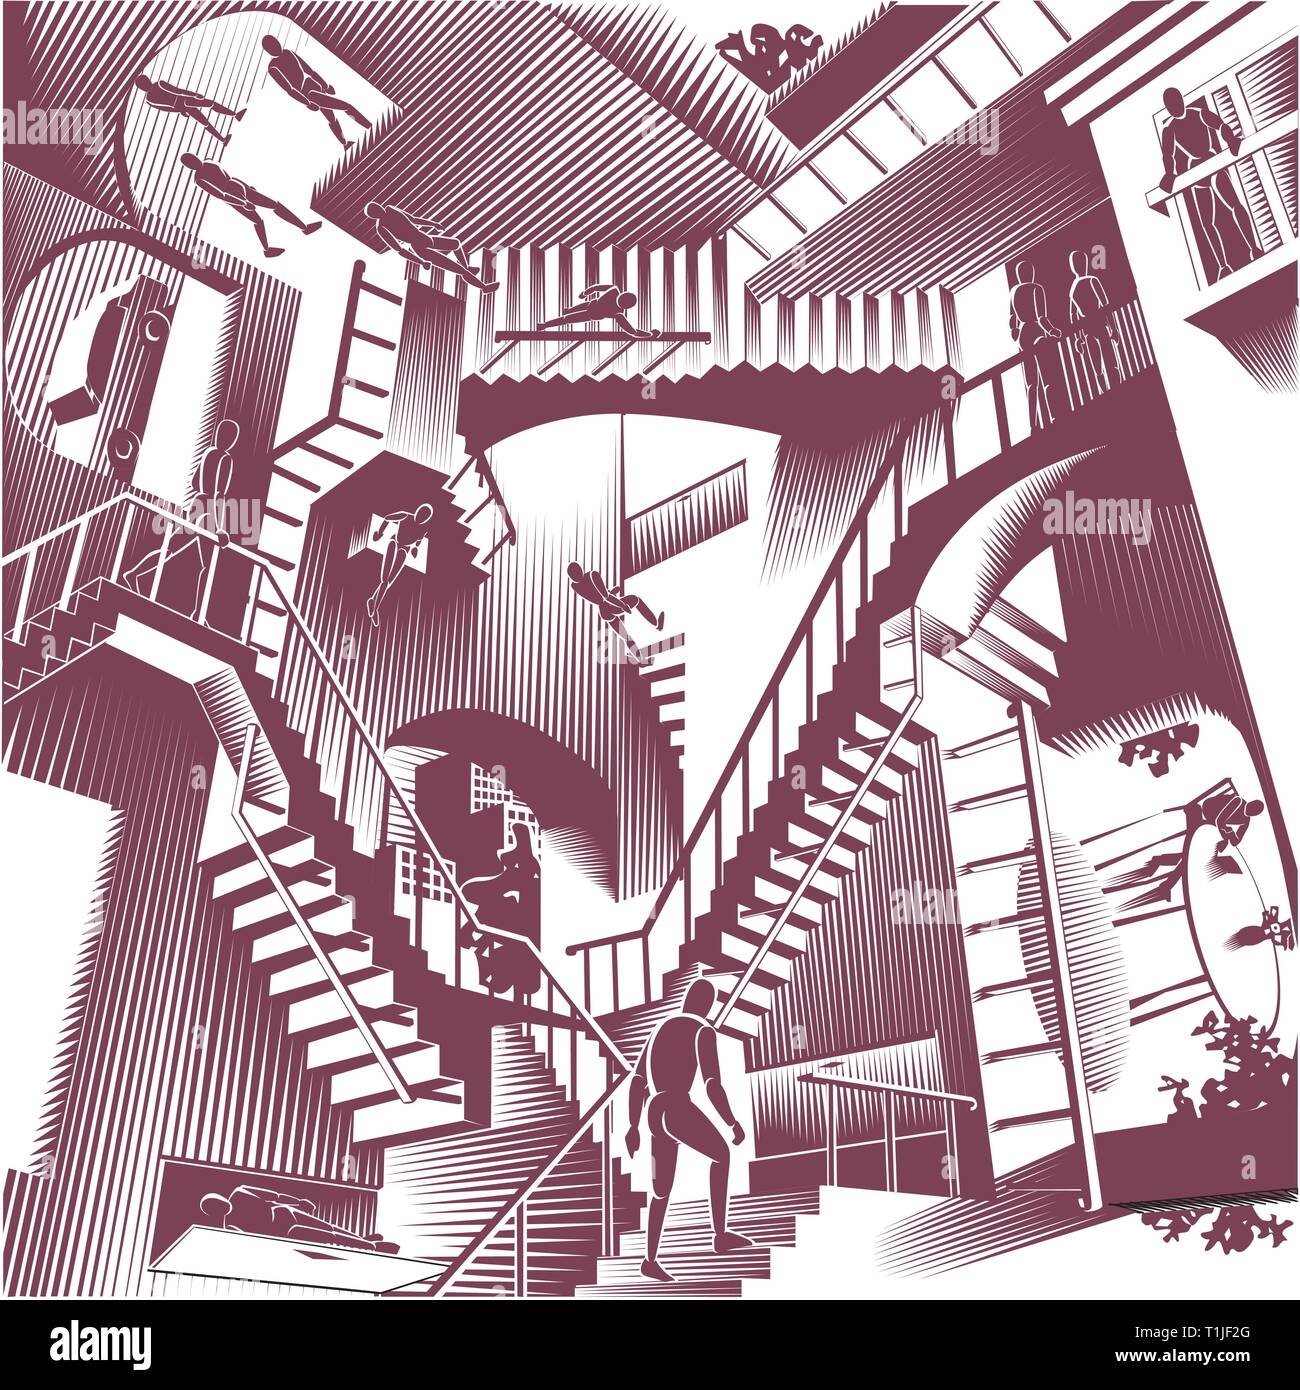 Confusion. A maze of stair cases running at different angles and directions with people walking, sitting and standing, going about their daily lives. Stock Vector